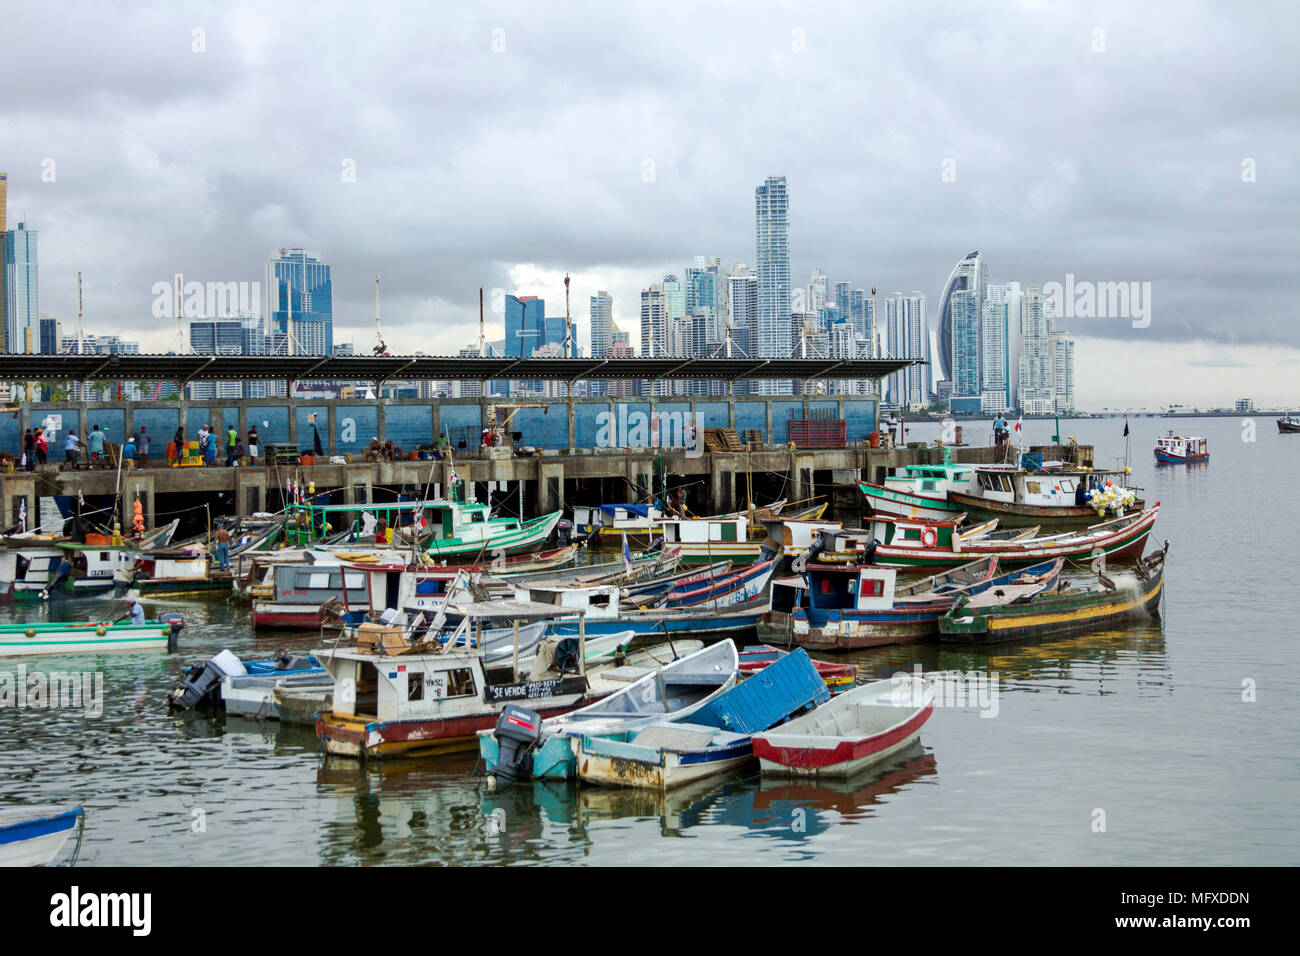 Colourful fishing boats anchored at the fish market in Panama City, Panama, with the city's modern high rises in the background Stock Photo